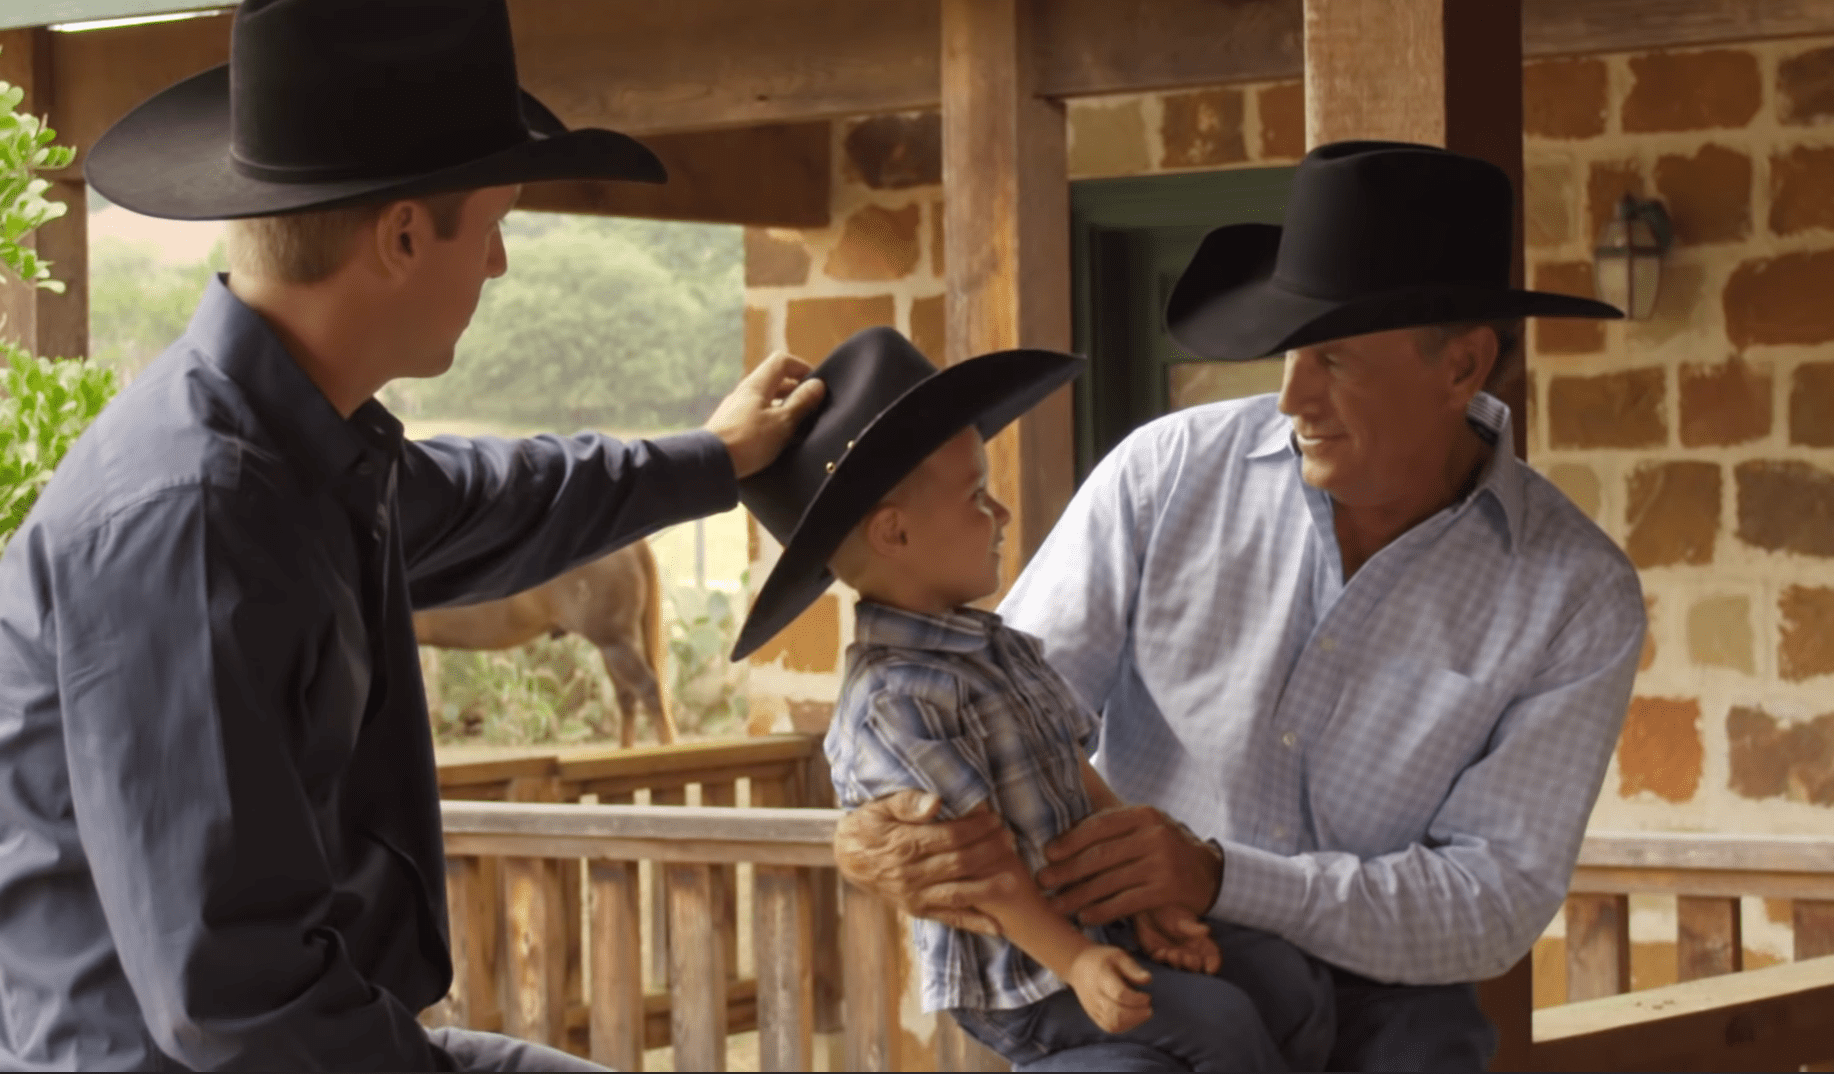 George Strait Jr., pictured with his son George Strait III and his father, George Strait ┃Source: YouTube/@GeorgeStrait